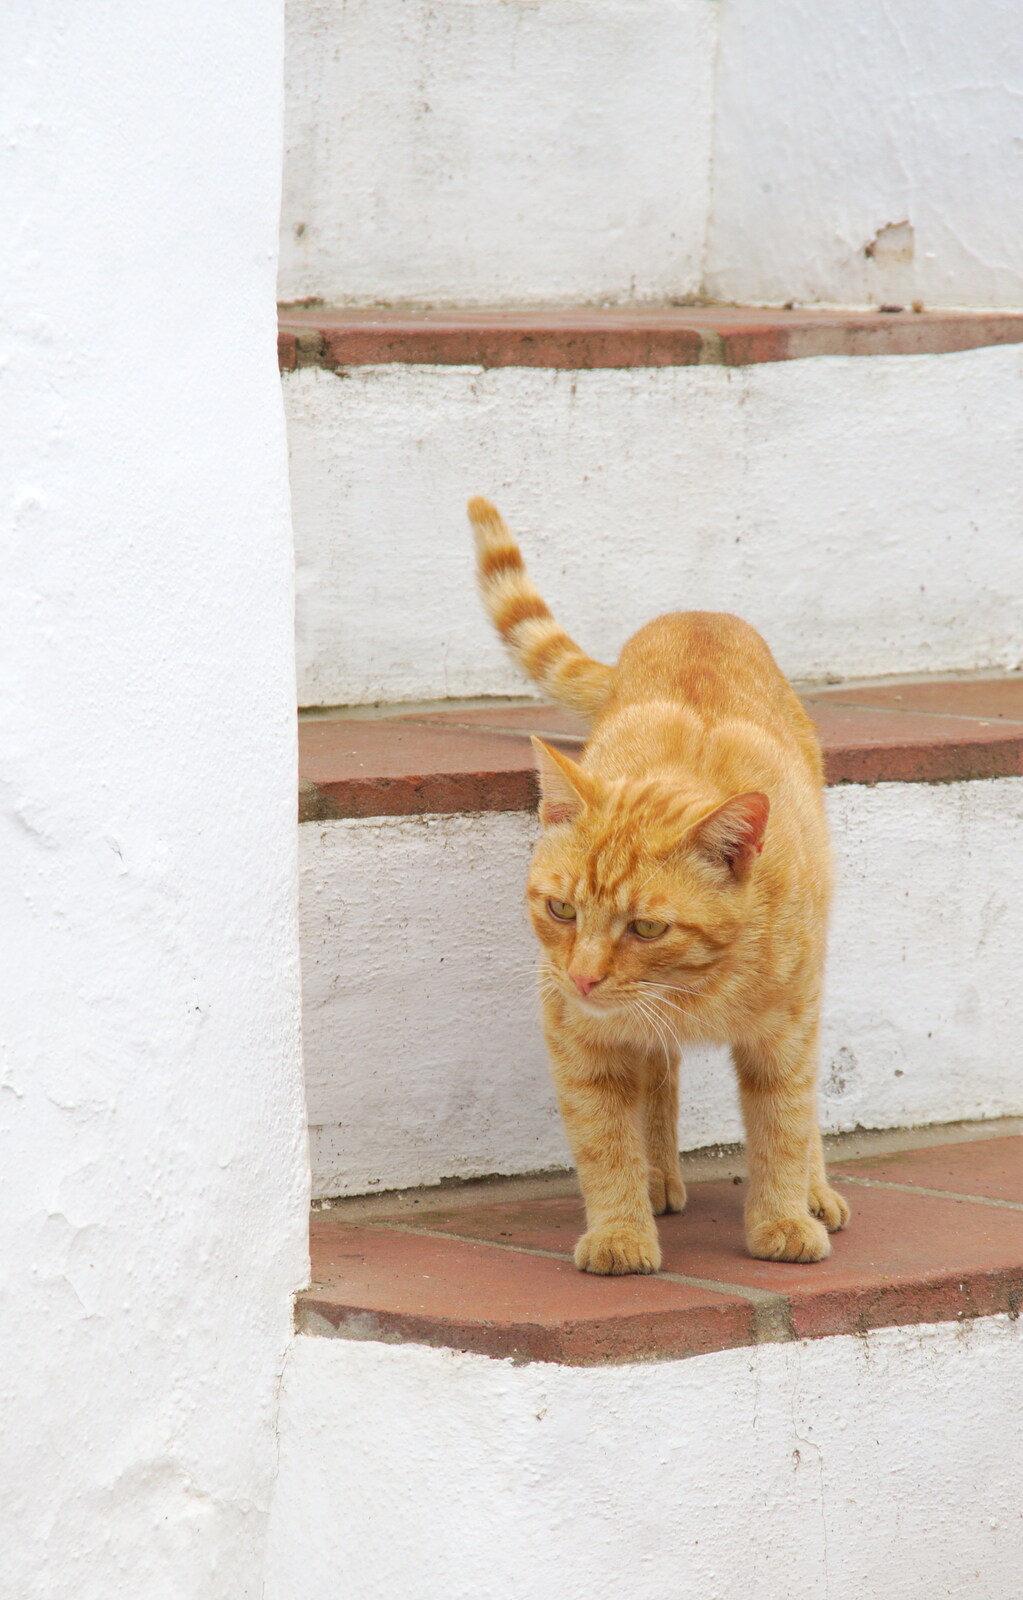 A stocky, stripey, ginger cat from The Caves of Nerja, and Frigiliana, Andalusia, Spain - 18th April 2019